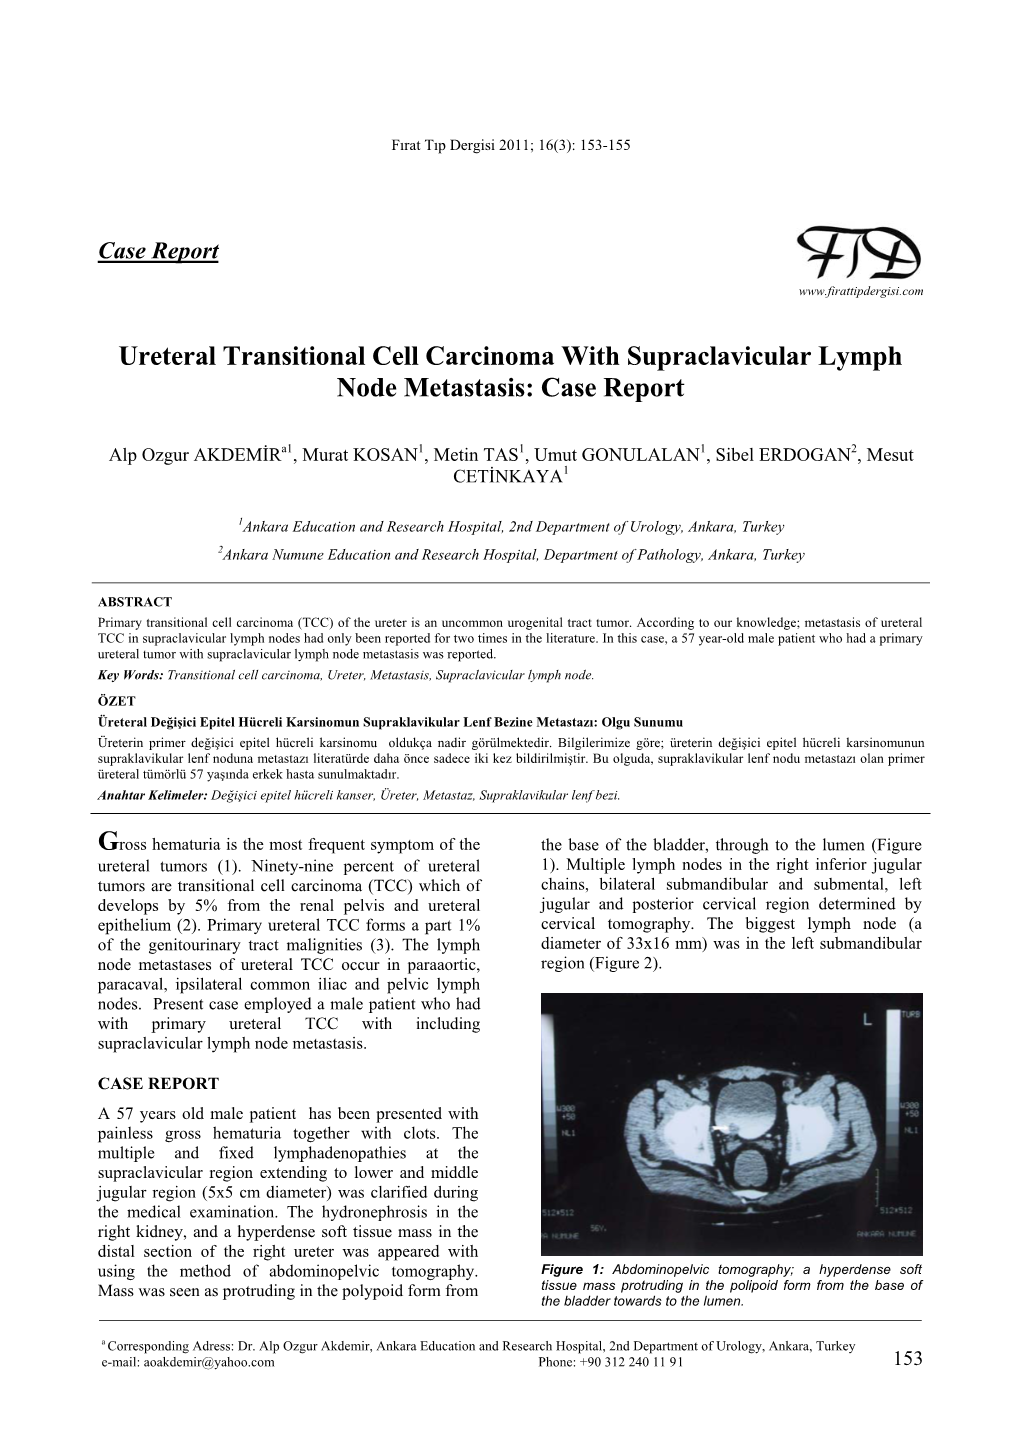 Ureteral Transitional Cell Carcinoma with Supraclavicular Lymph Node Metastasis: Case Report